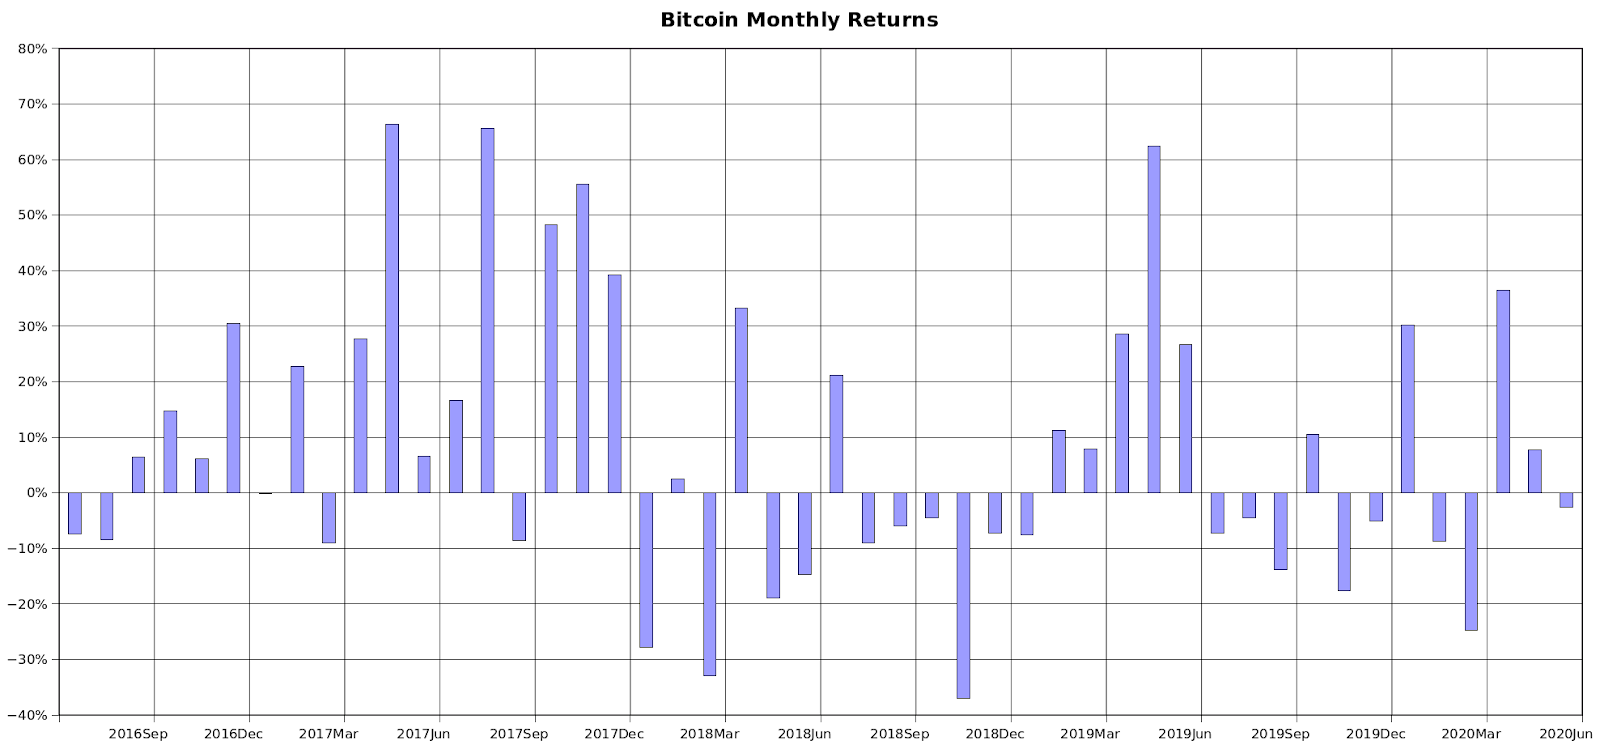 Bitcoin monthly returns during the last halving period